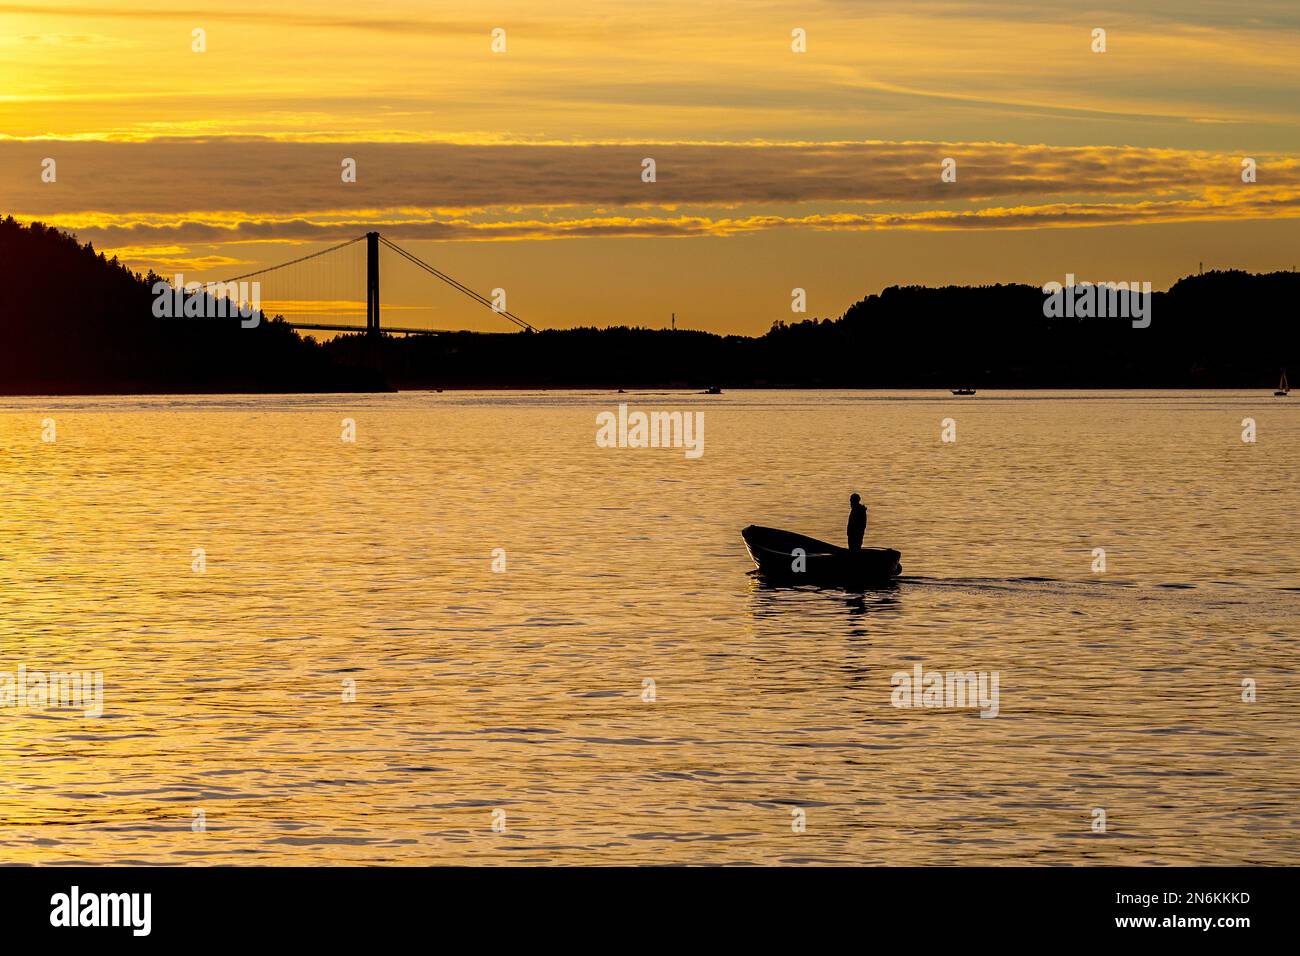 A man in a small boat, at Byfjorden, at sunset. Outside port of Bergen, Norway. Askøy bridge in background Stock Photo